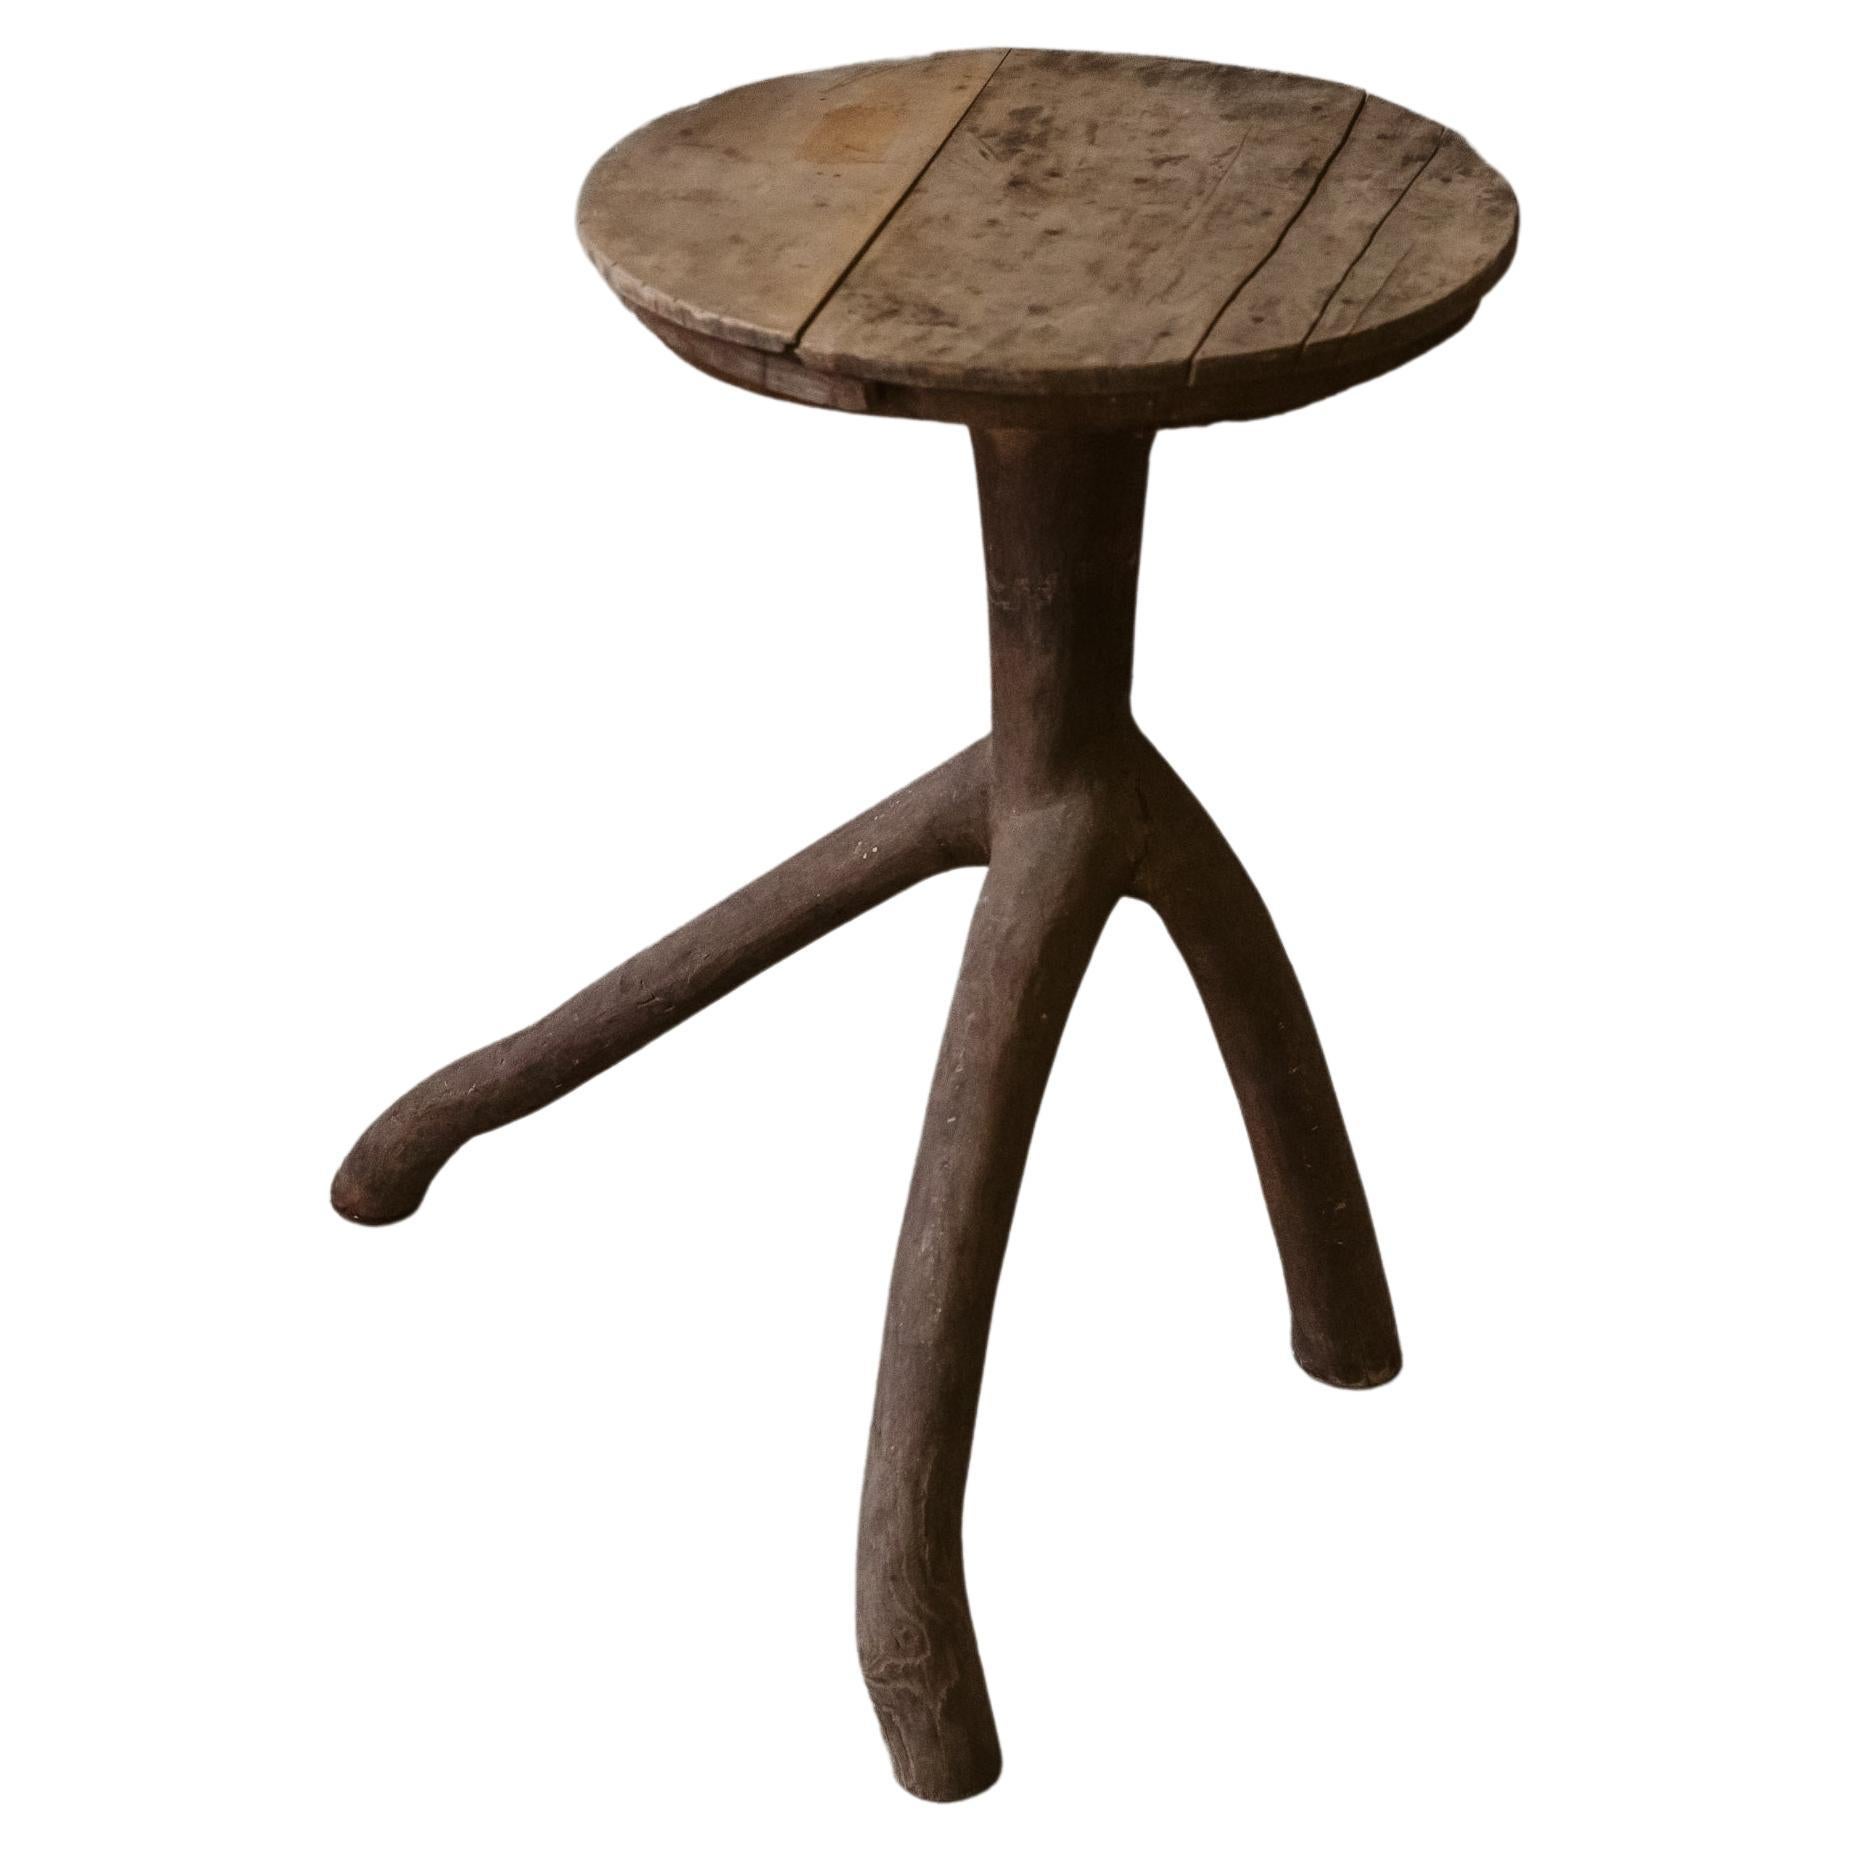 Primitive Pine Side Table From Sweden, Circa 1900